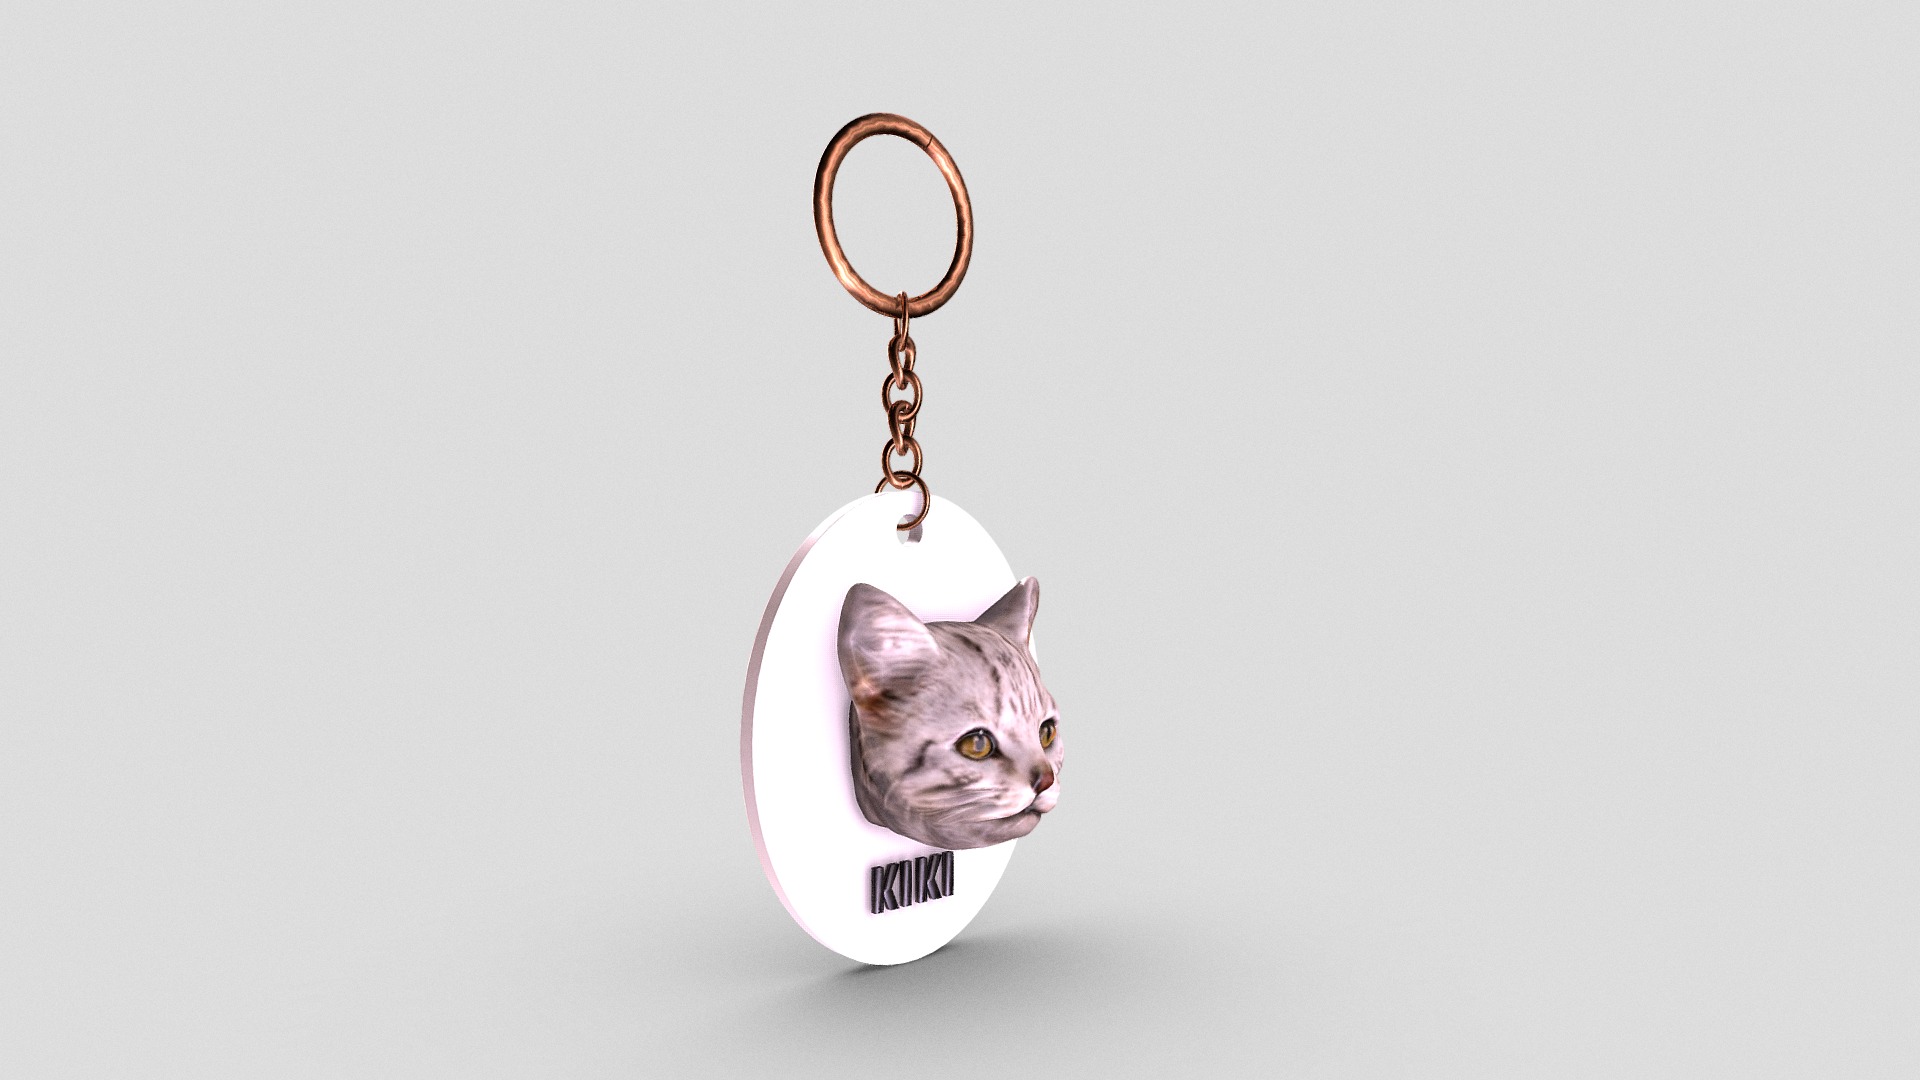 3D model key2 - This is a 3D model of the key2. The 3D model is about a keychain with a cat on it.